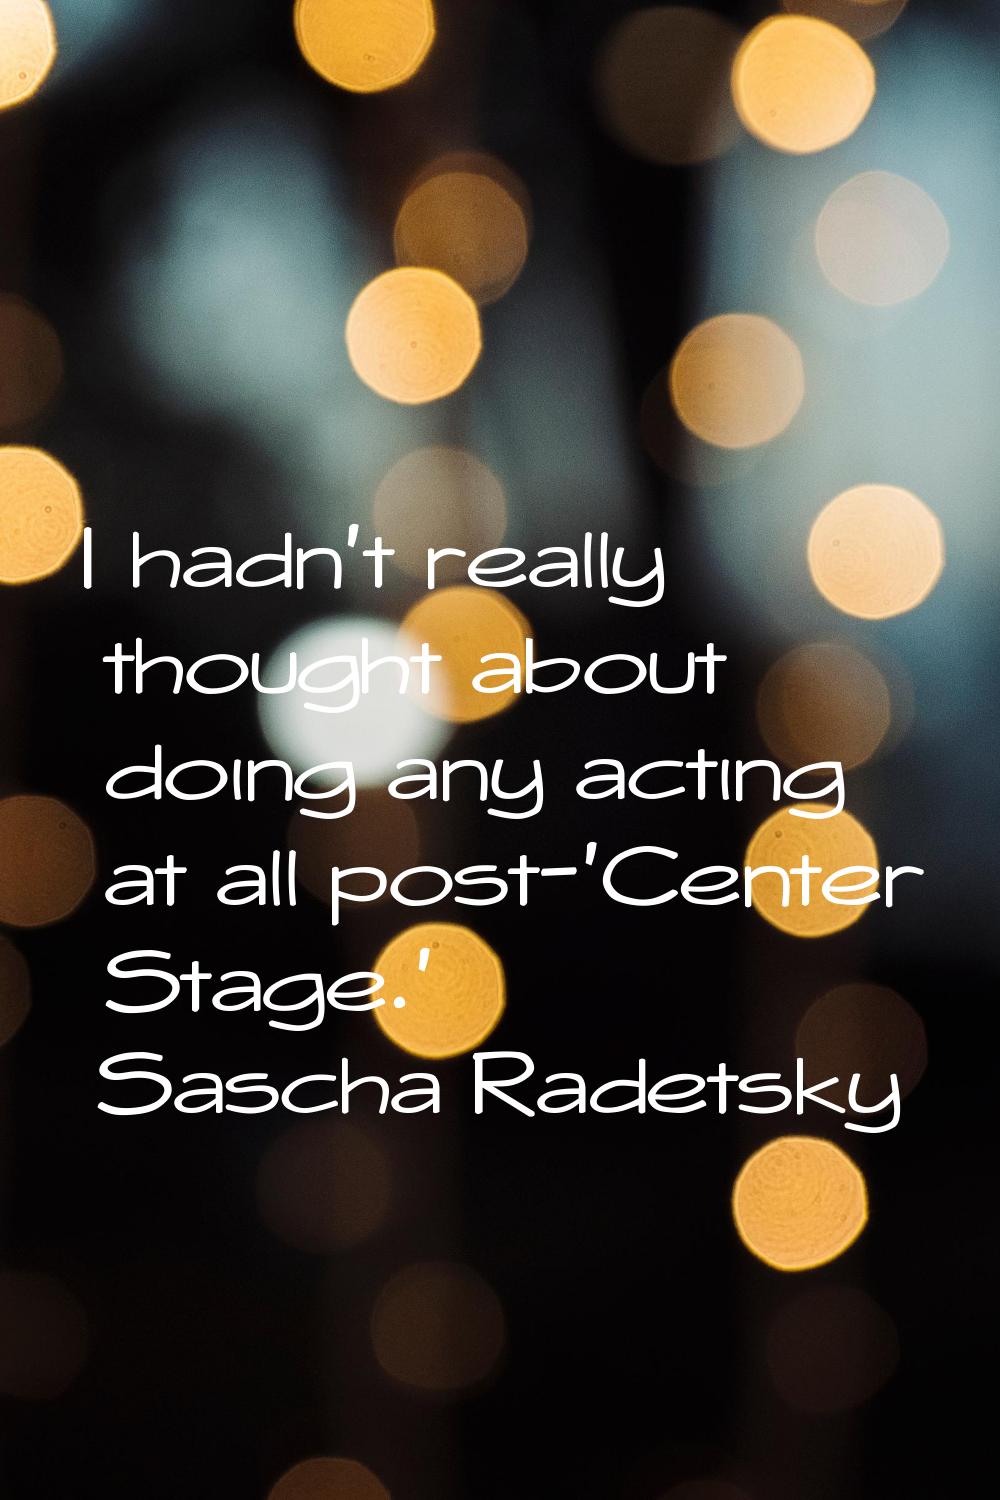 I hadn't really thought about doing any acting at all post-'Center Stage.'